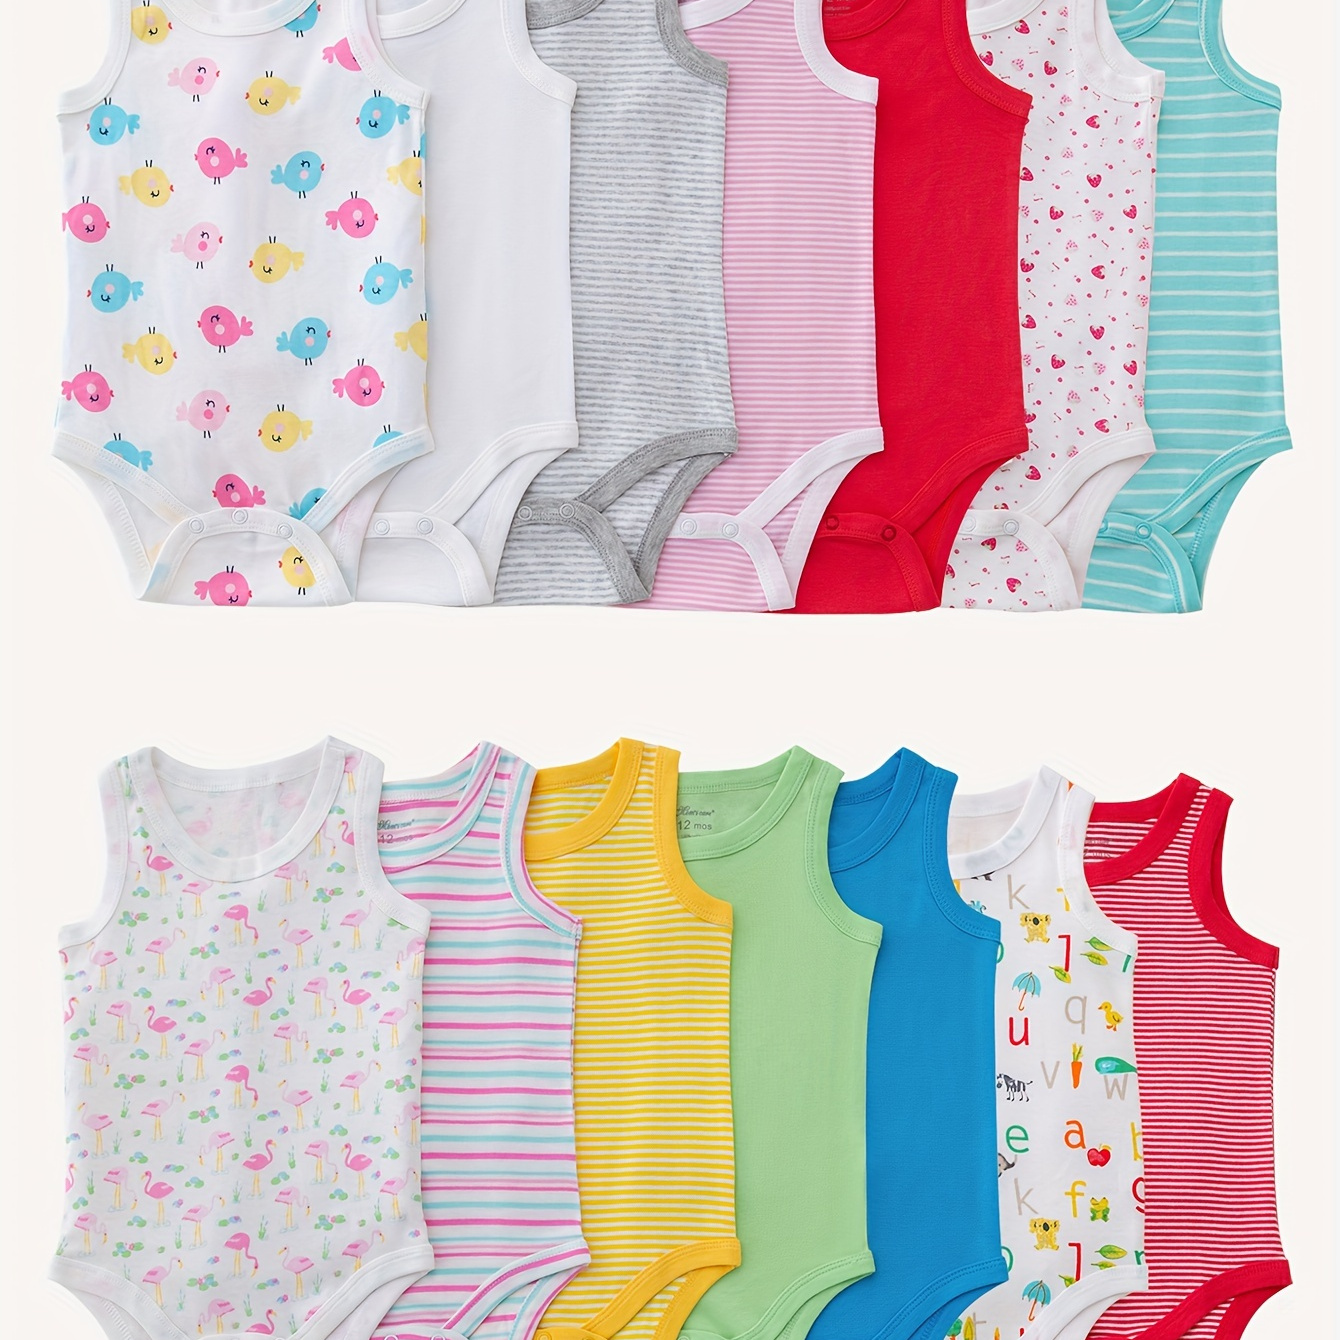 

7pcs Baby's Comfy Cotton Triangle Bodysuit, Casual Solid Color & Cartoon Pattern Sleeveless Romper, Toddler & Infant Girl's Onesie For Summer, As Gift